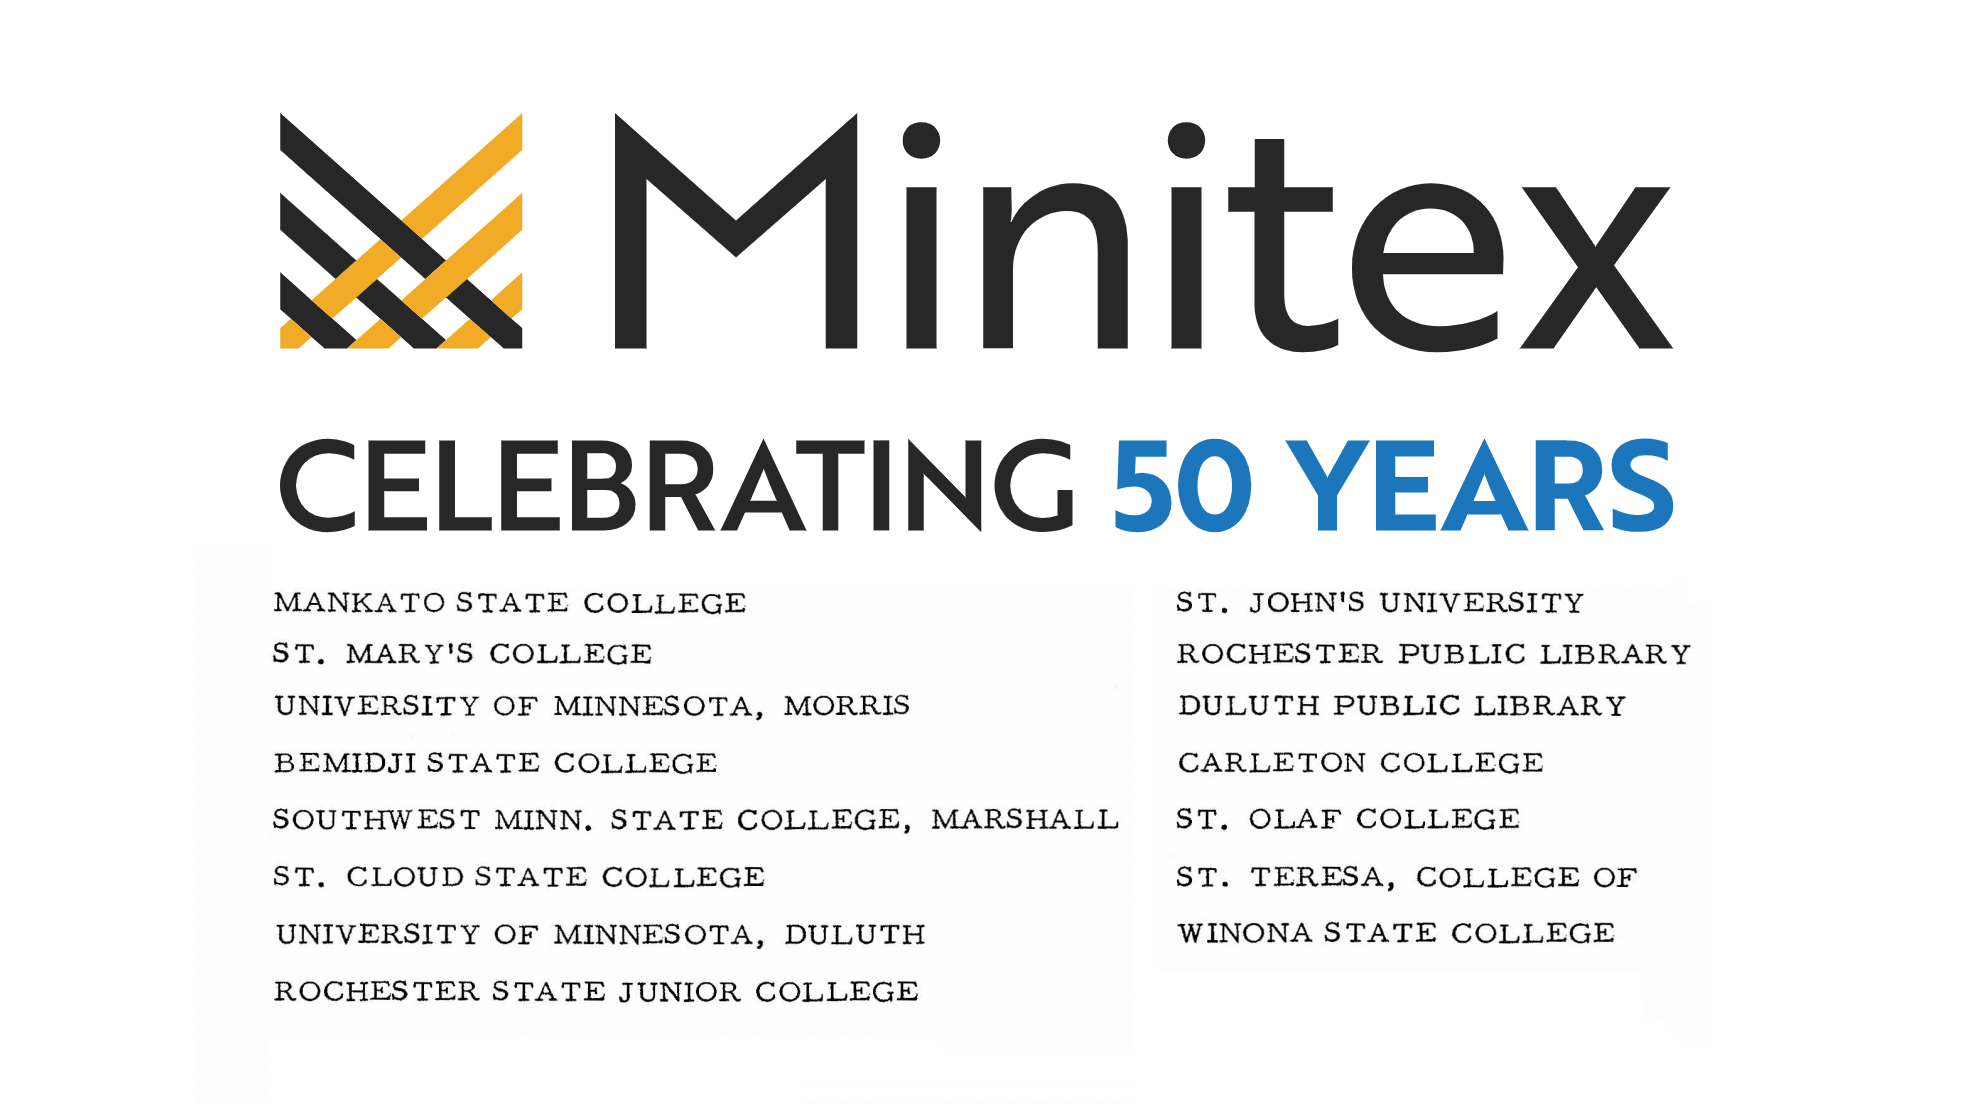 The Minitex "Celebrating 50 Years" logo above the names of the fifteen libraries that participated in the pilot phase.